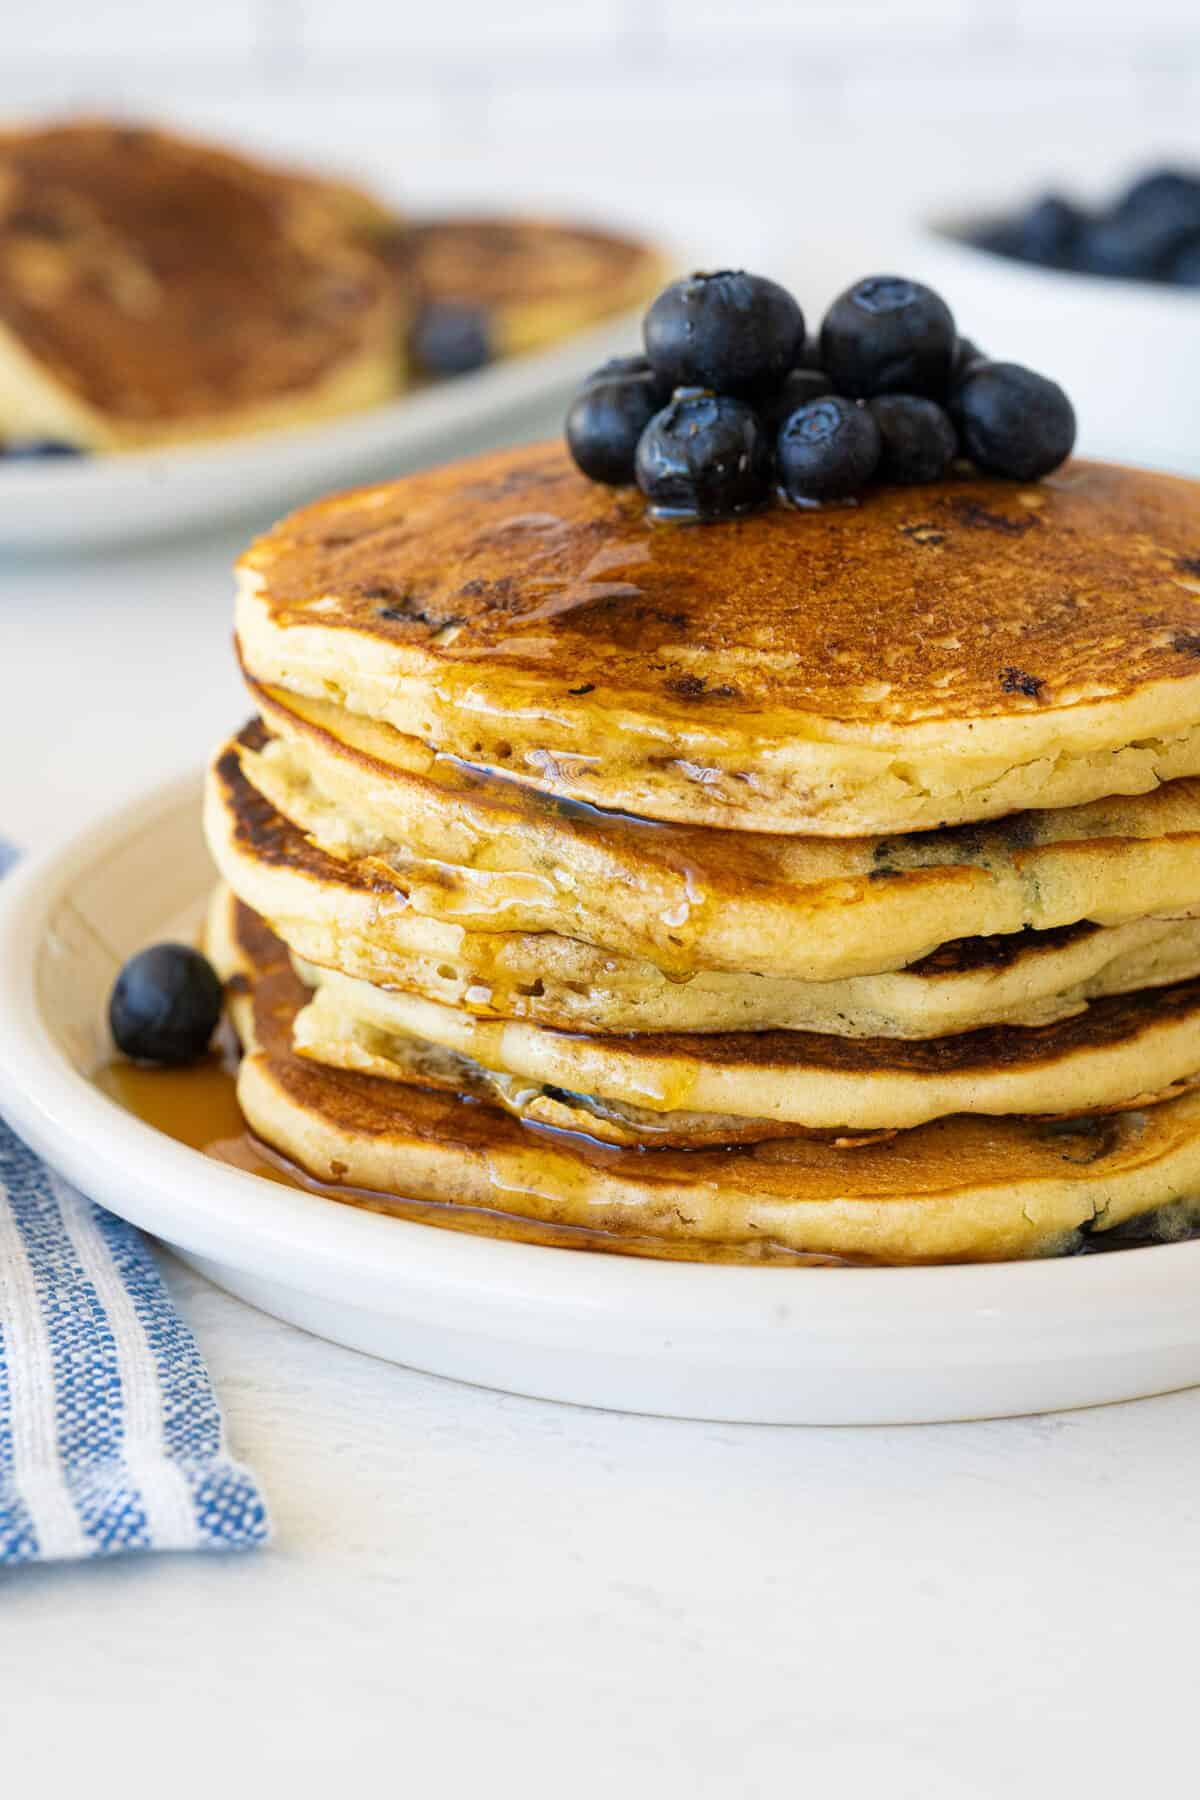 blueberry pancakes on a white plate with syrup pour3ed on them